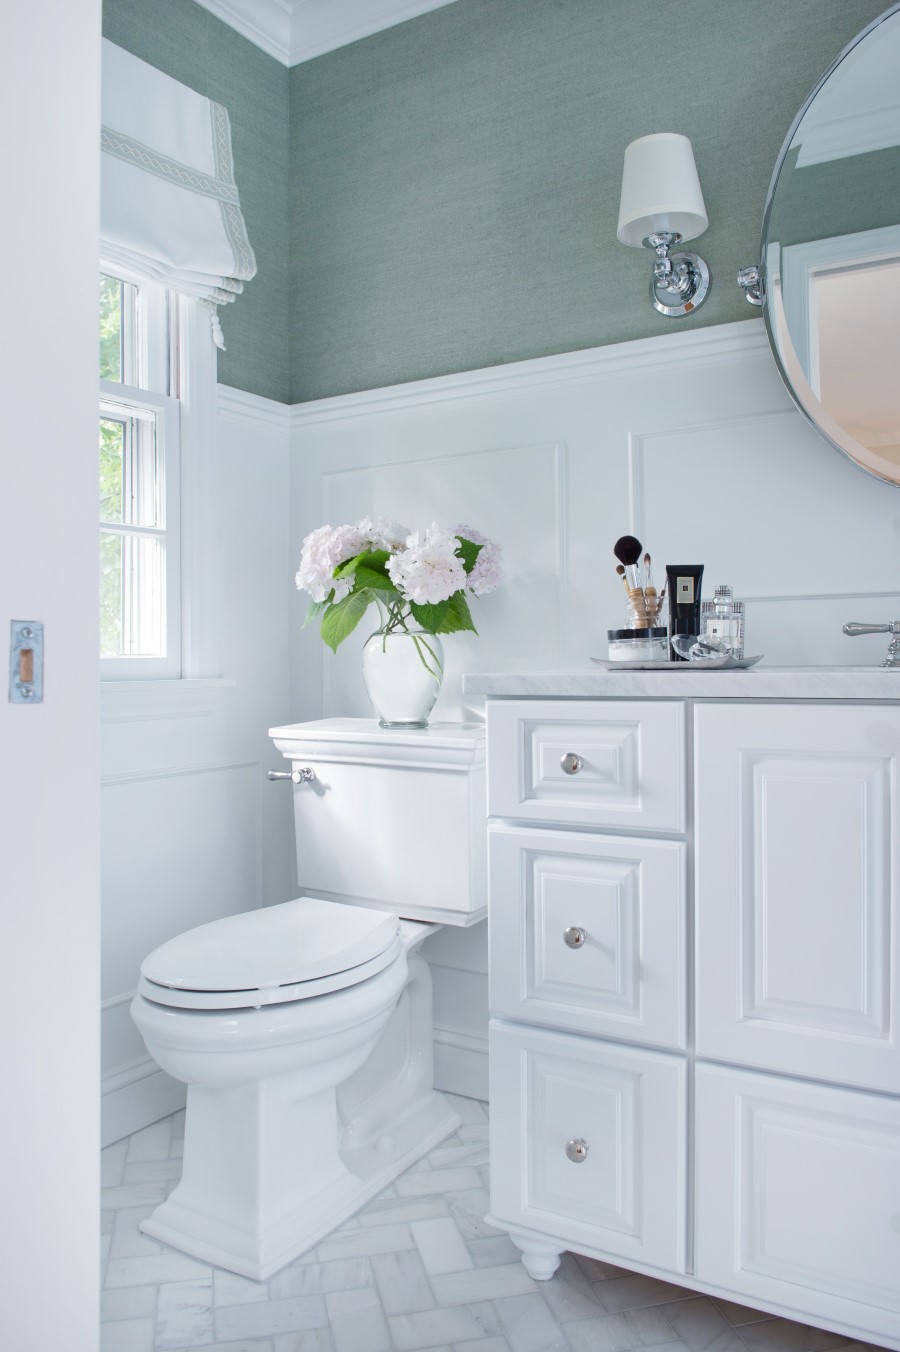 This beautiful bathroom photo was one of our most popular on Houzz